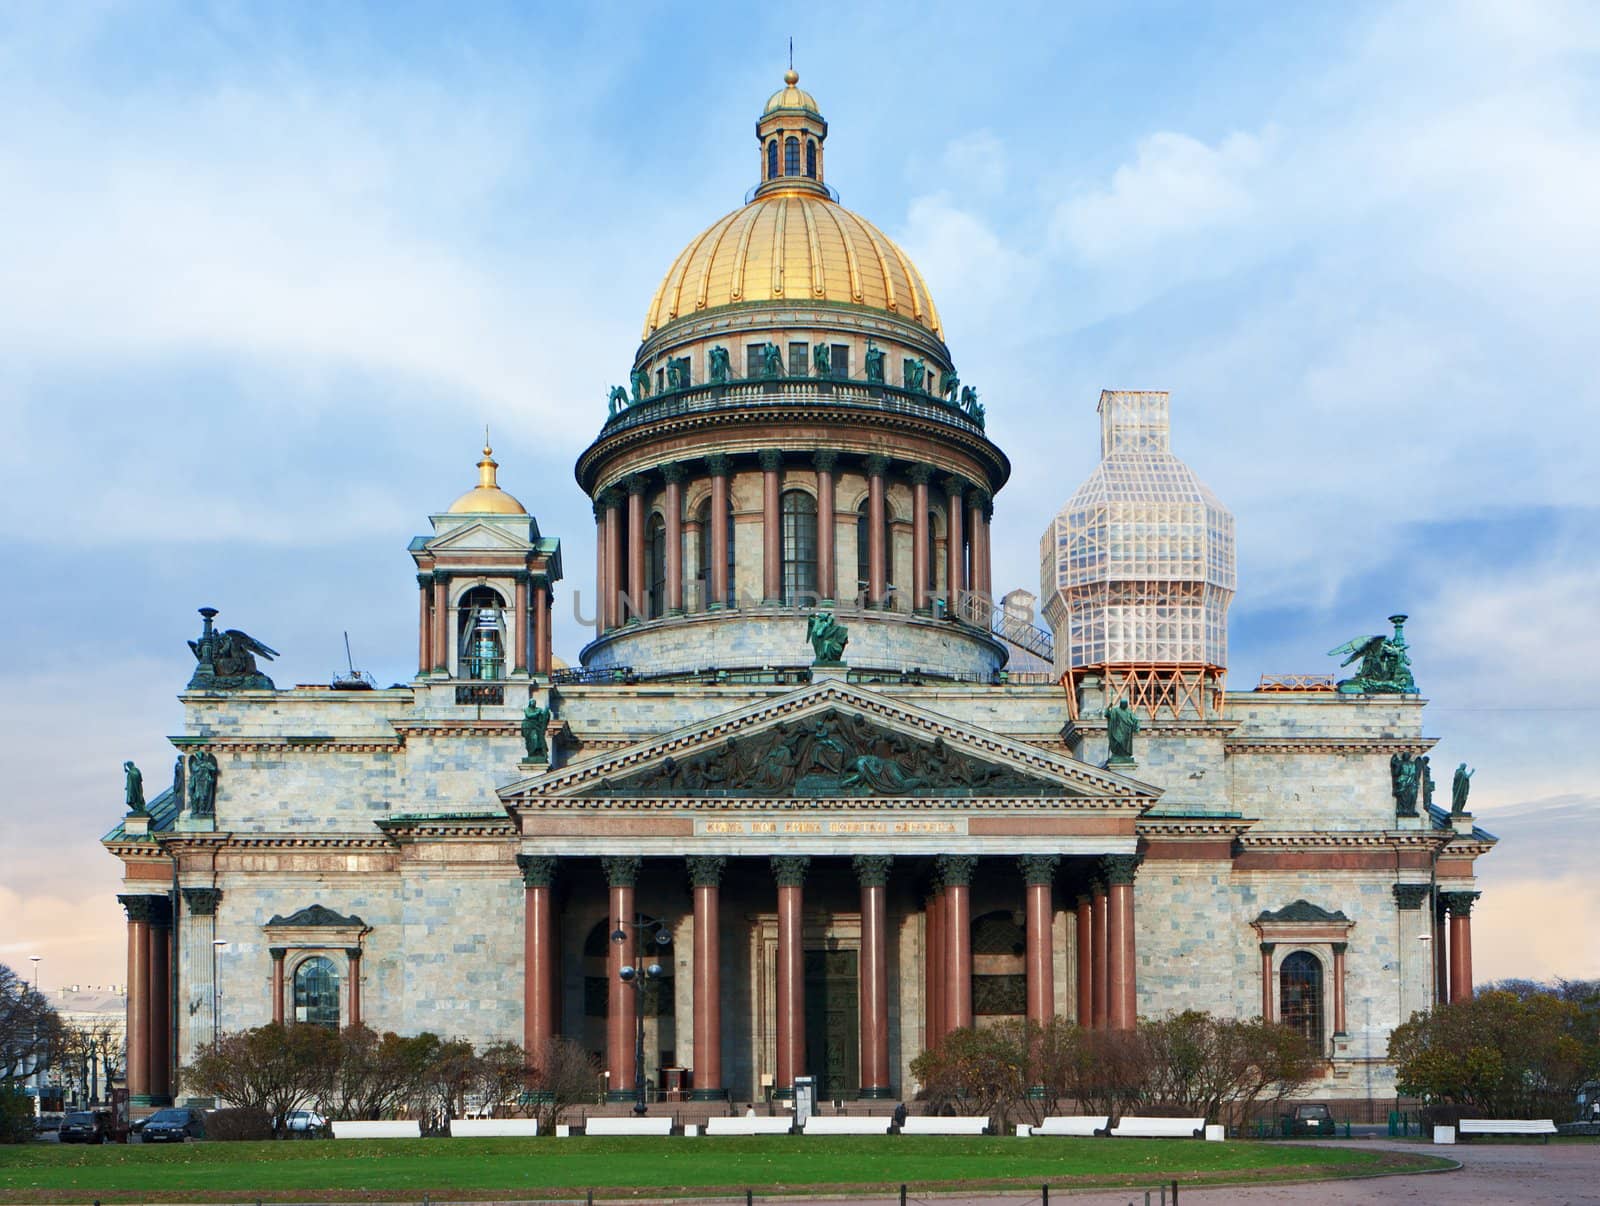 Saint Isaac's Cathedral in Saint-Petersburg by nigerfoxy